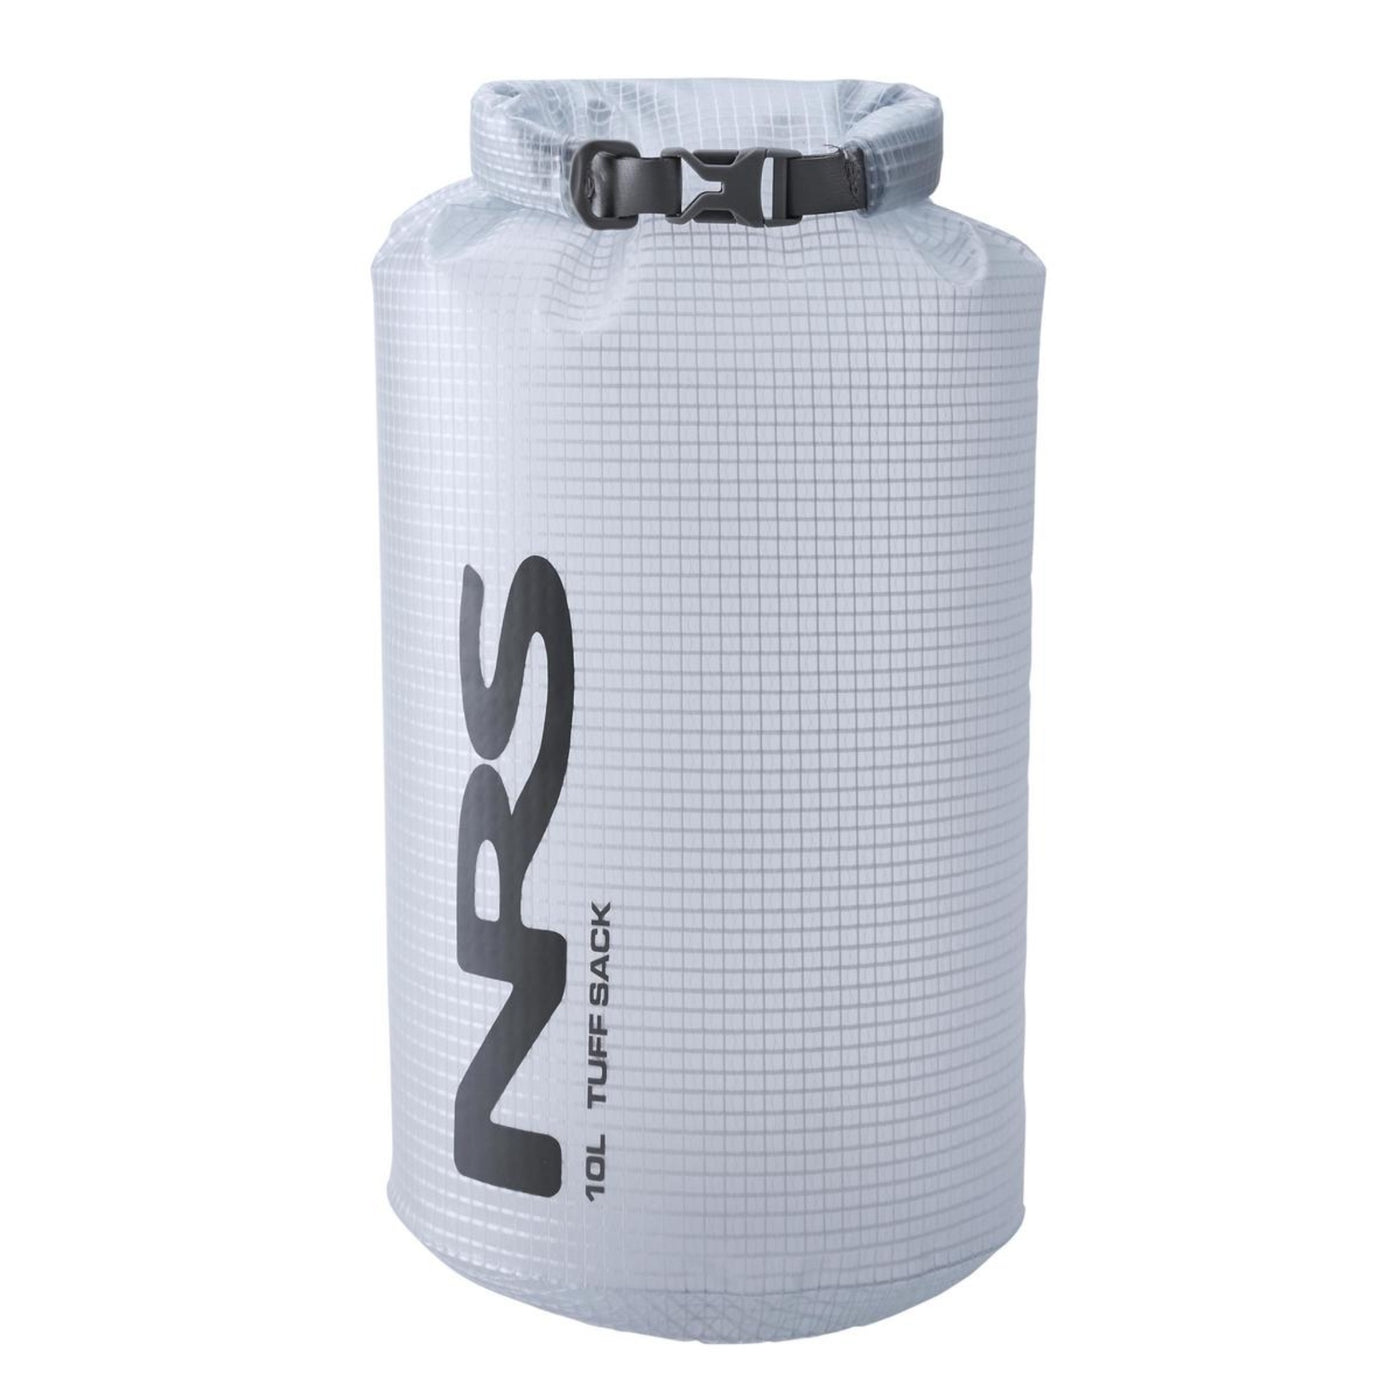 NRS Tuff Sack Dry Bag 35L | Kayak Dry Bags and Accessories | NRS NZ | Further Faster Christchurch NZ #clear